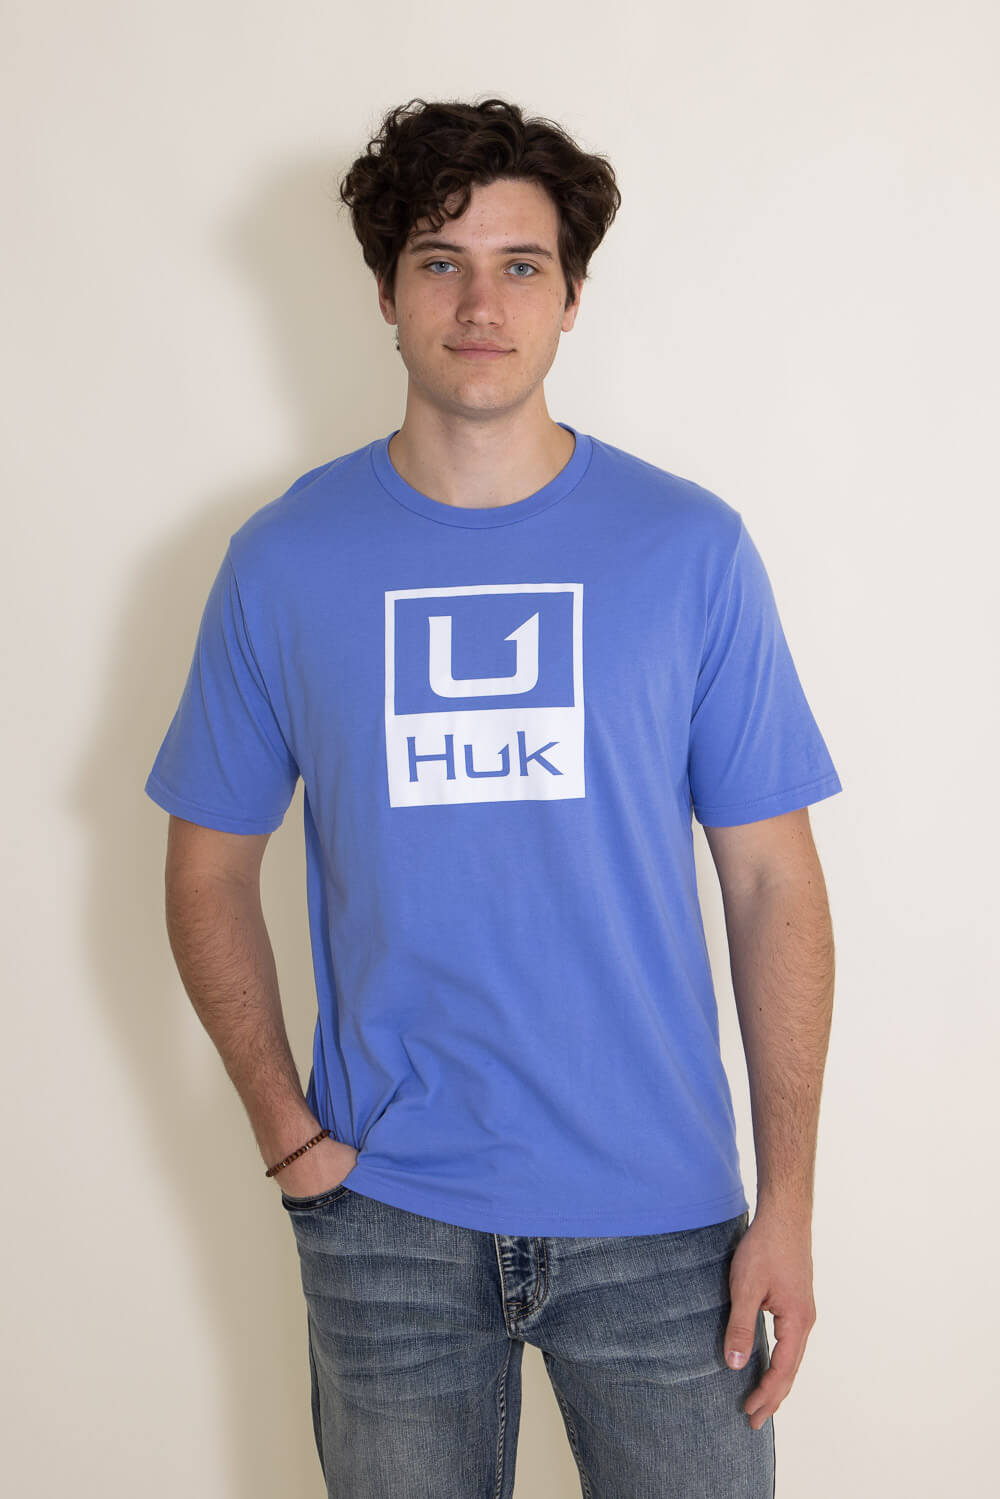 Huk Short Sleeve Fishing T-Shirts for sale